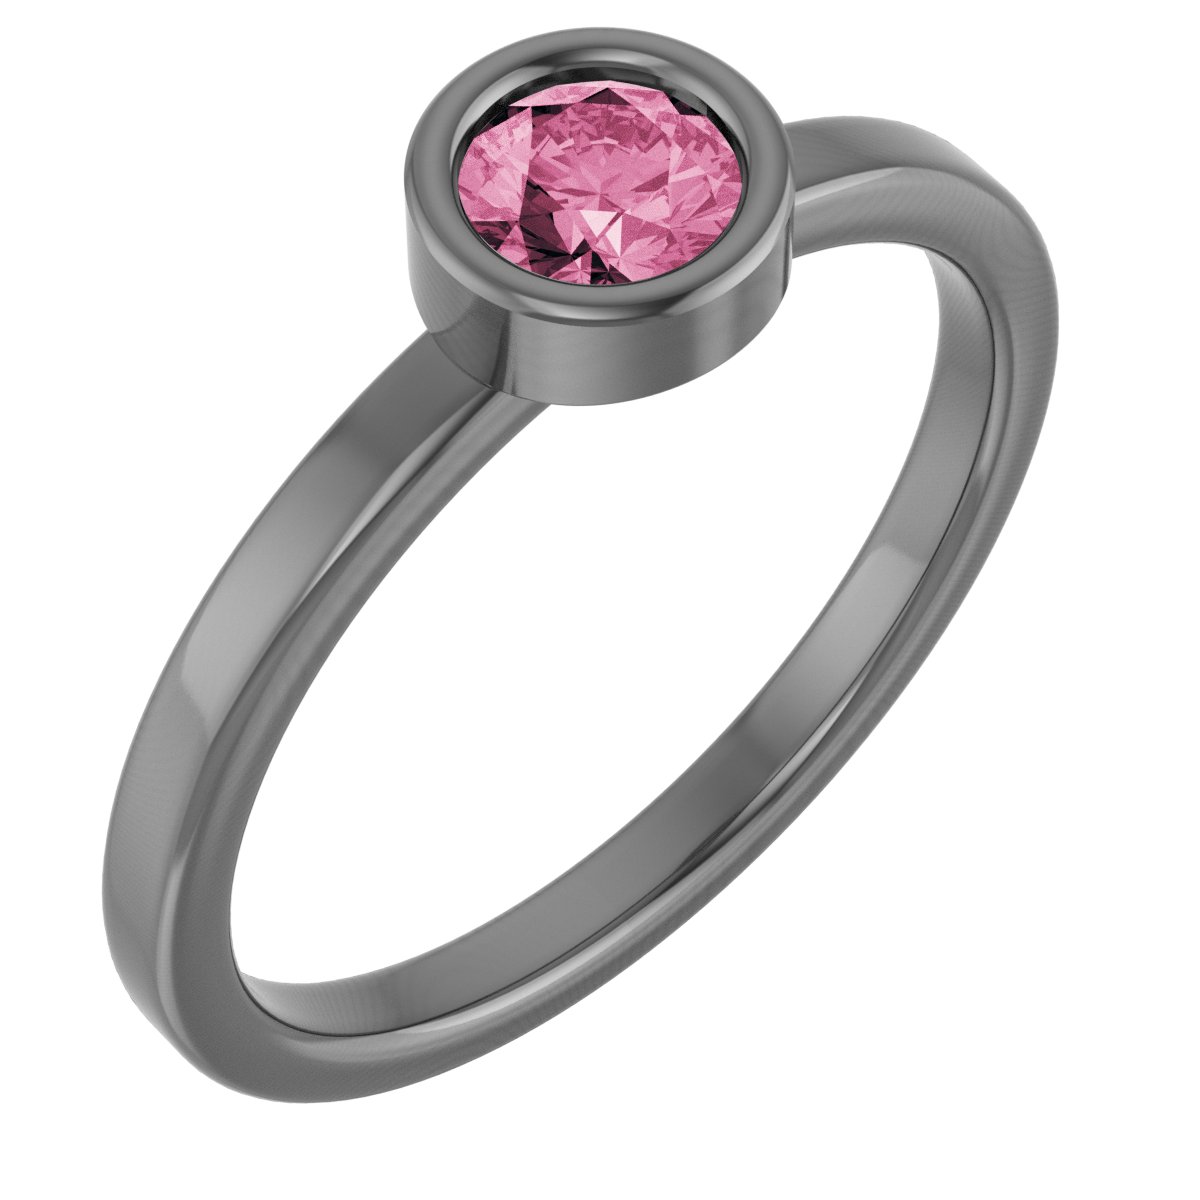 Rhodium-Plated Sterling Silver 4.5 mm Natural Pink Tourmaline Ring